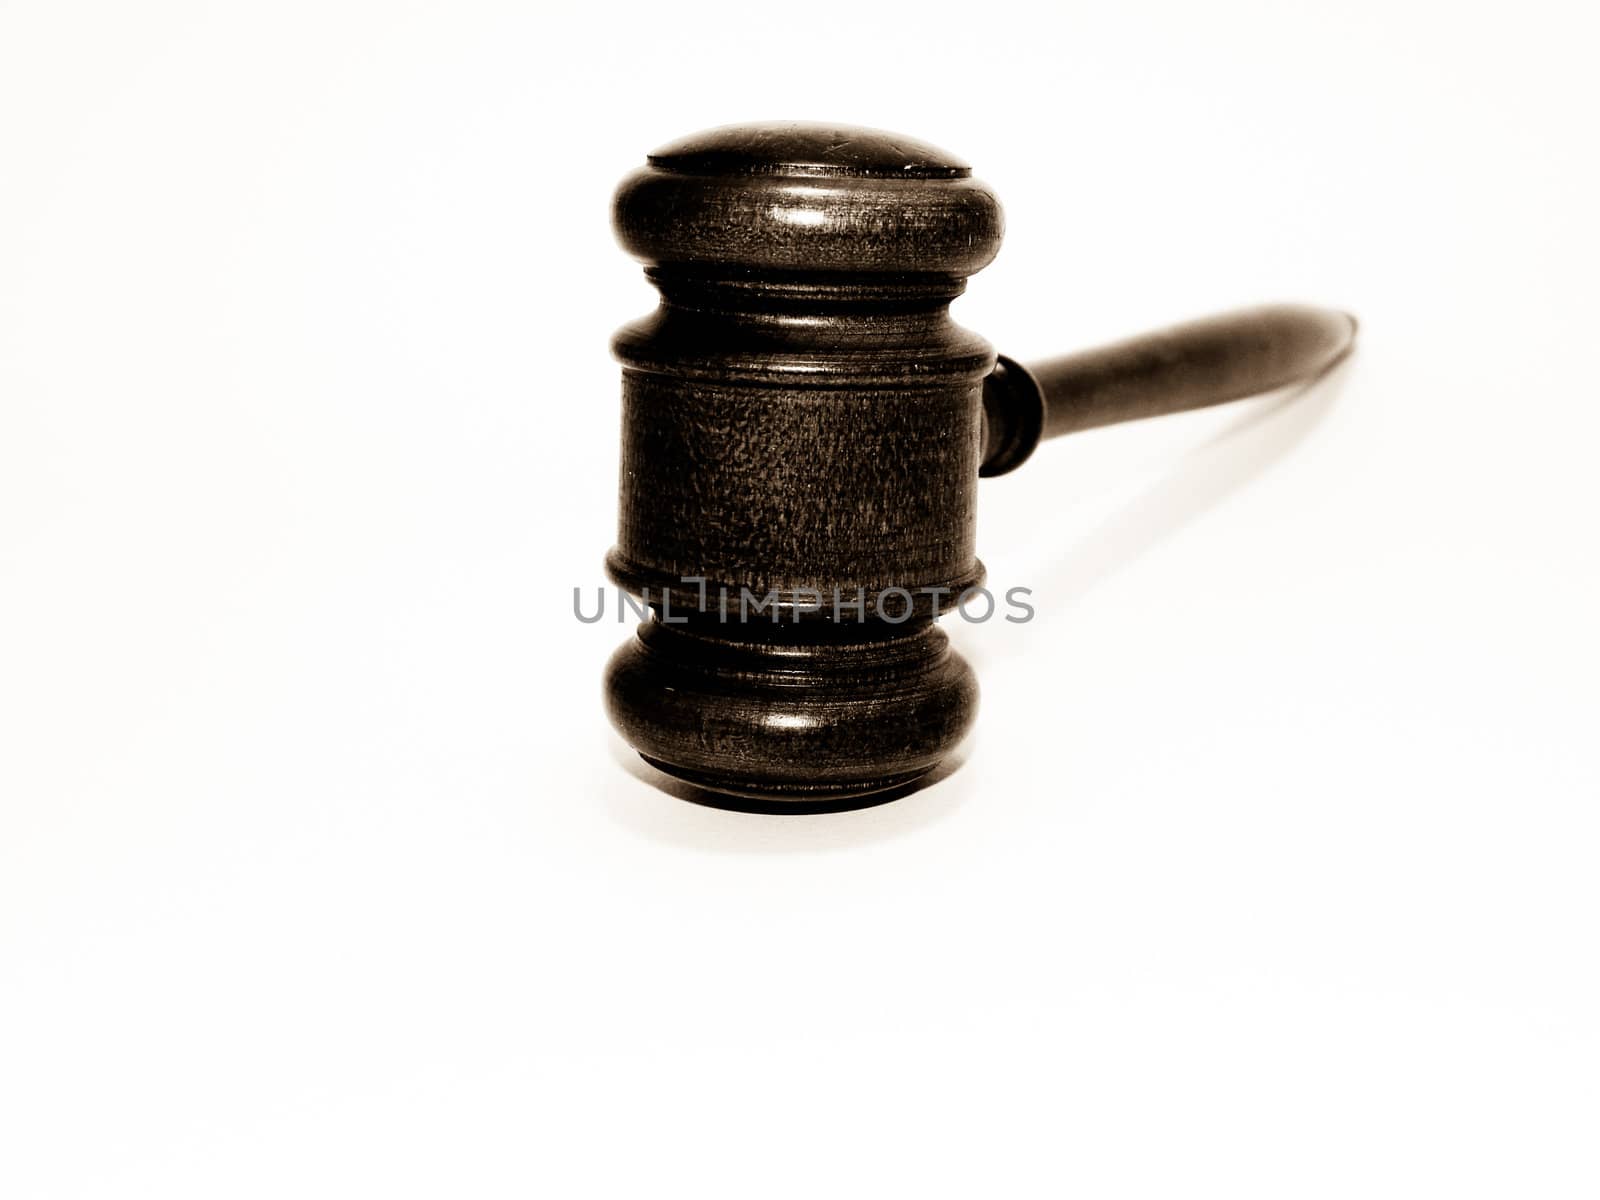 Gavel in sepia on white by chaosmediamgt